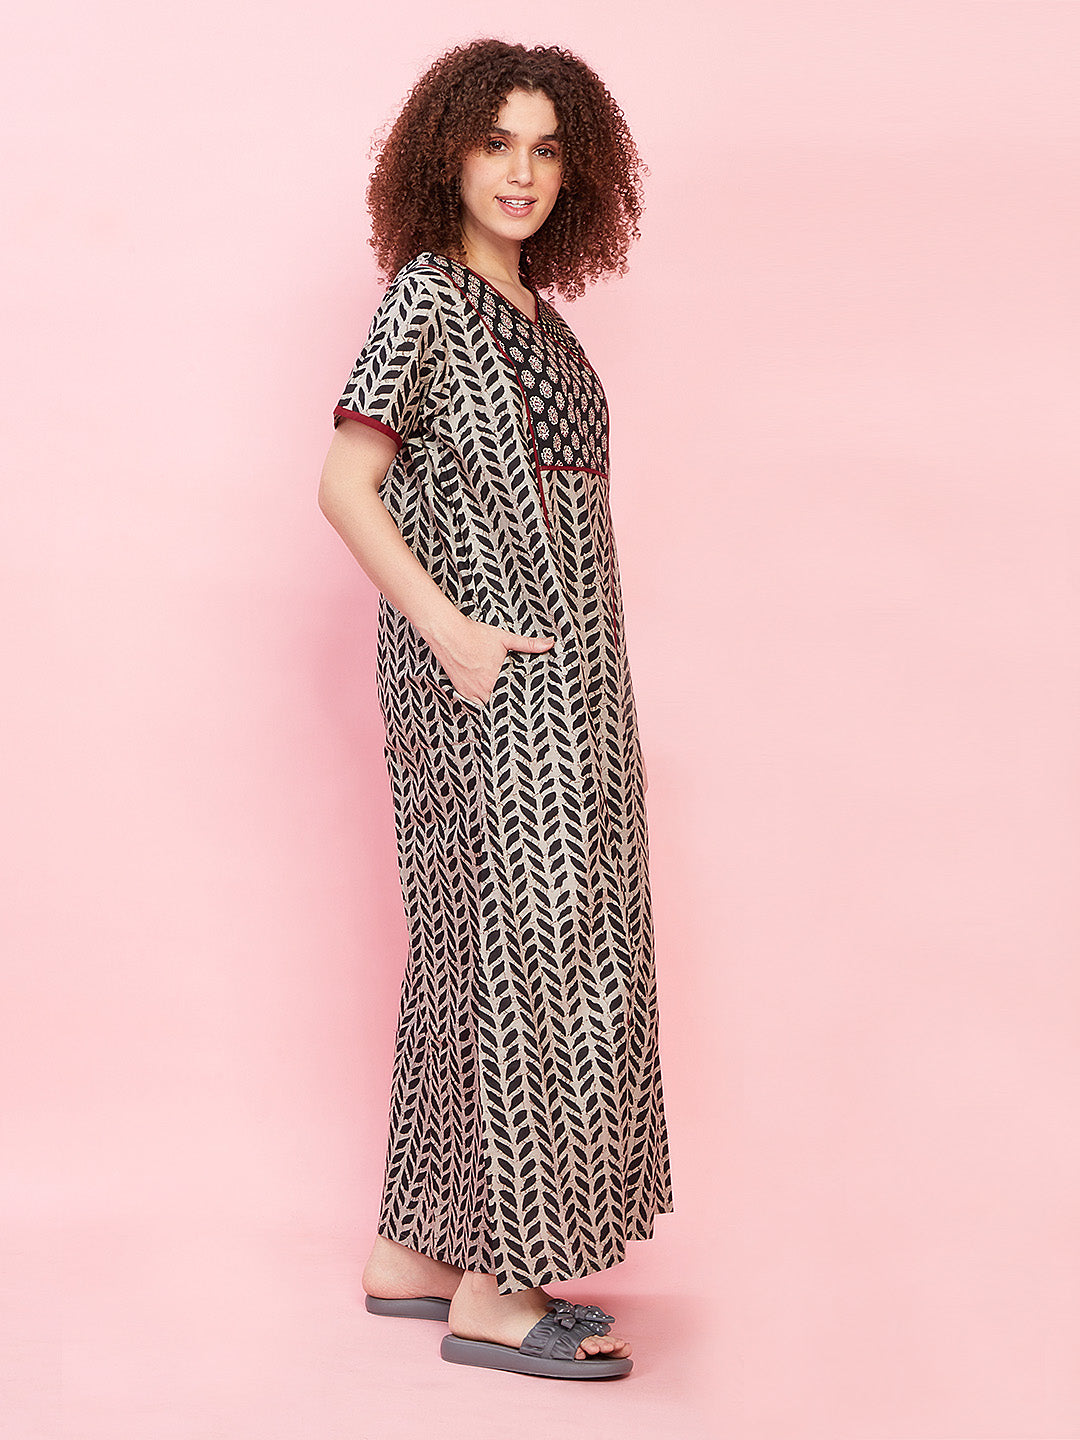 SuperSoft most comfortable 100% Mercerised compact Cotton  Night Gown with Pocket. Really long lasting. You will love it. Our Guarantee.